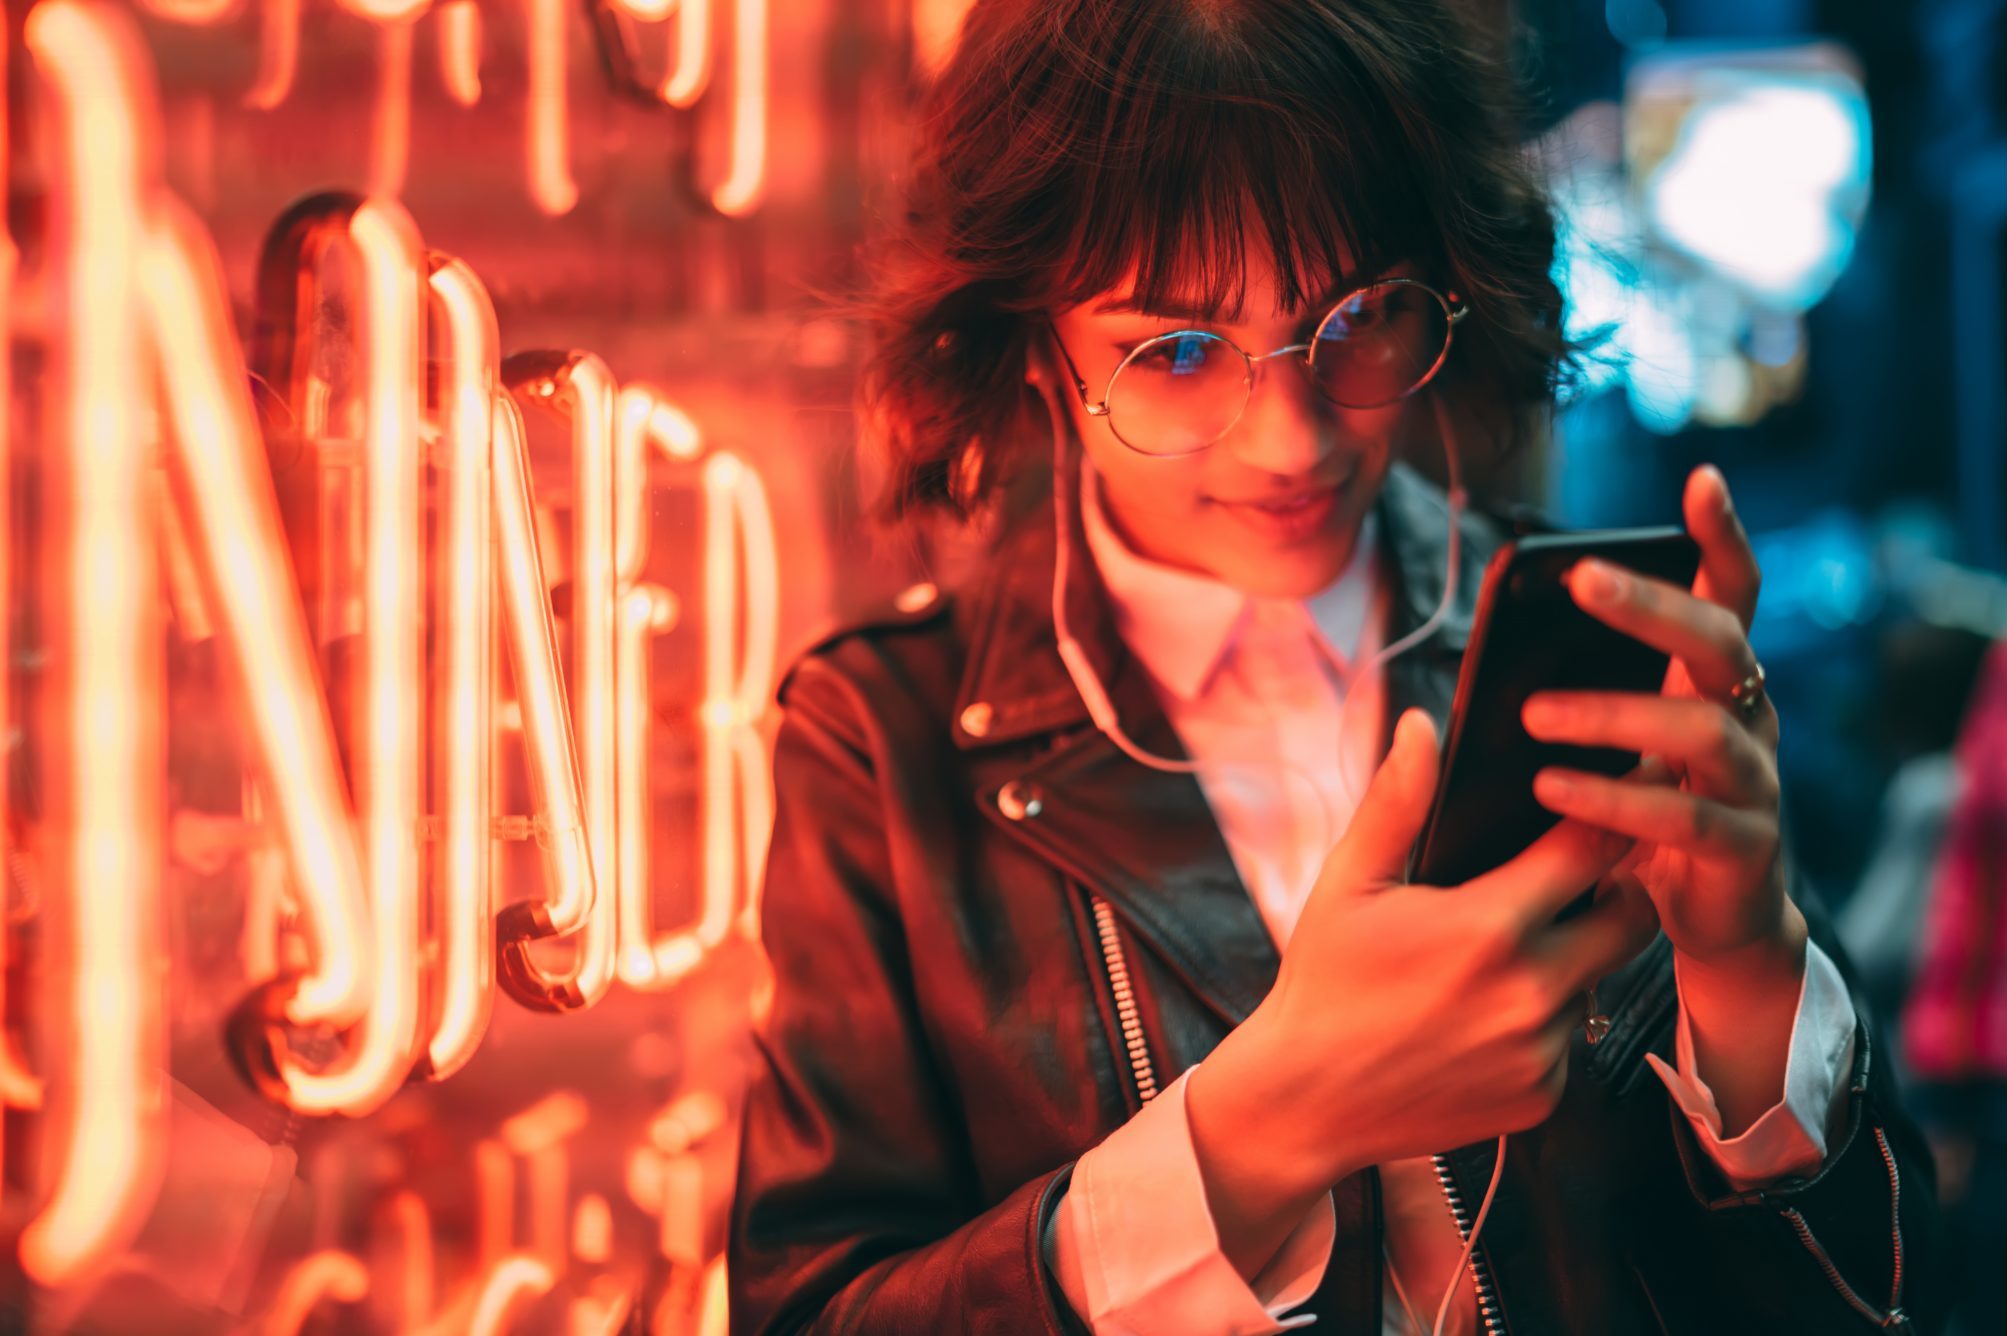 Young woman looking at smartphone next to red neon light